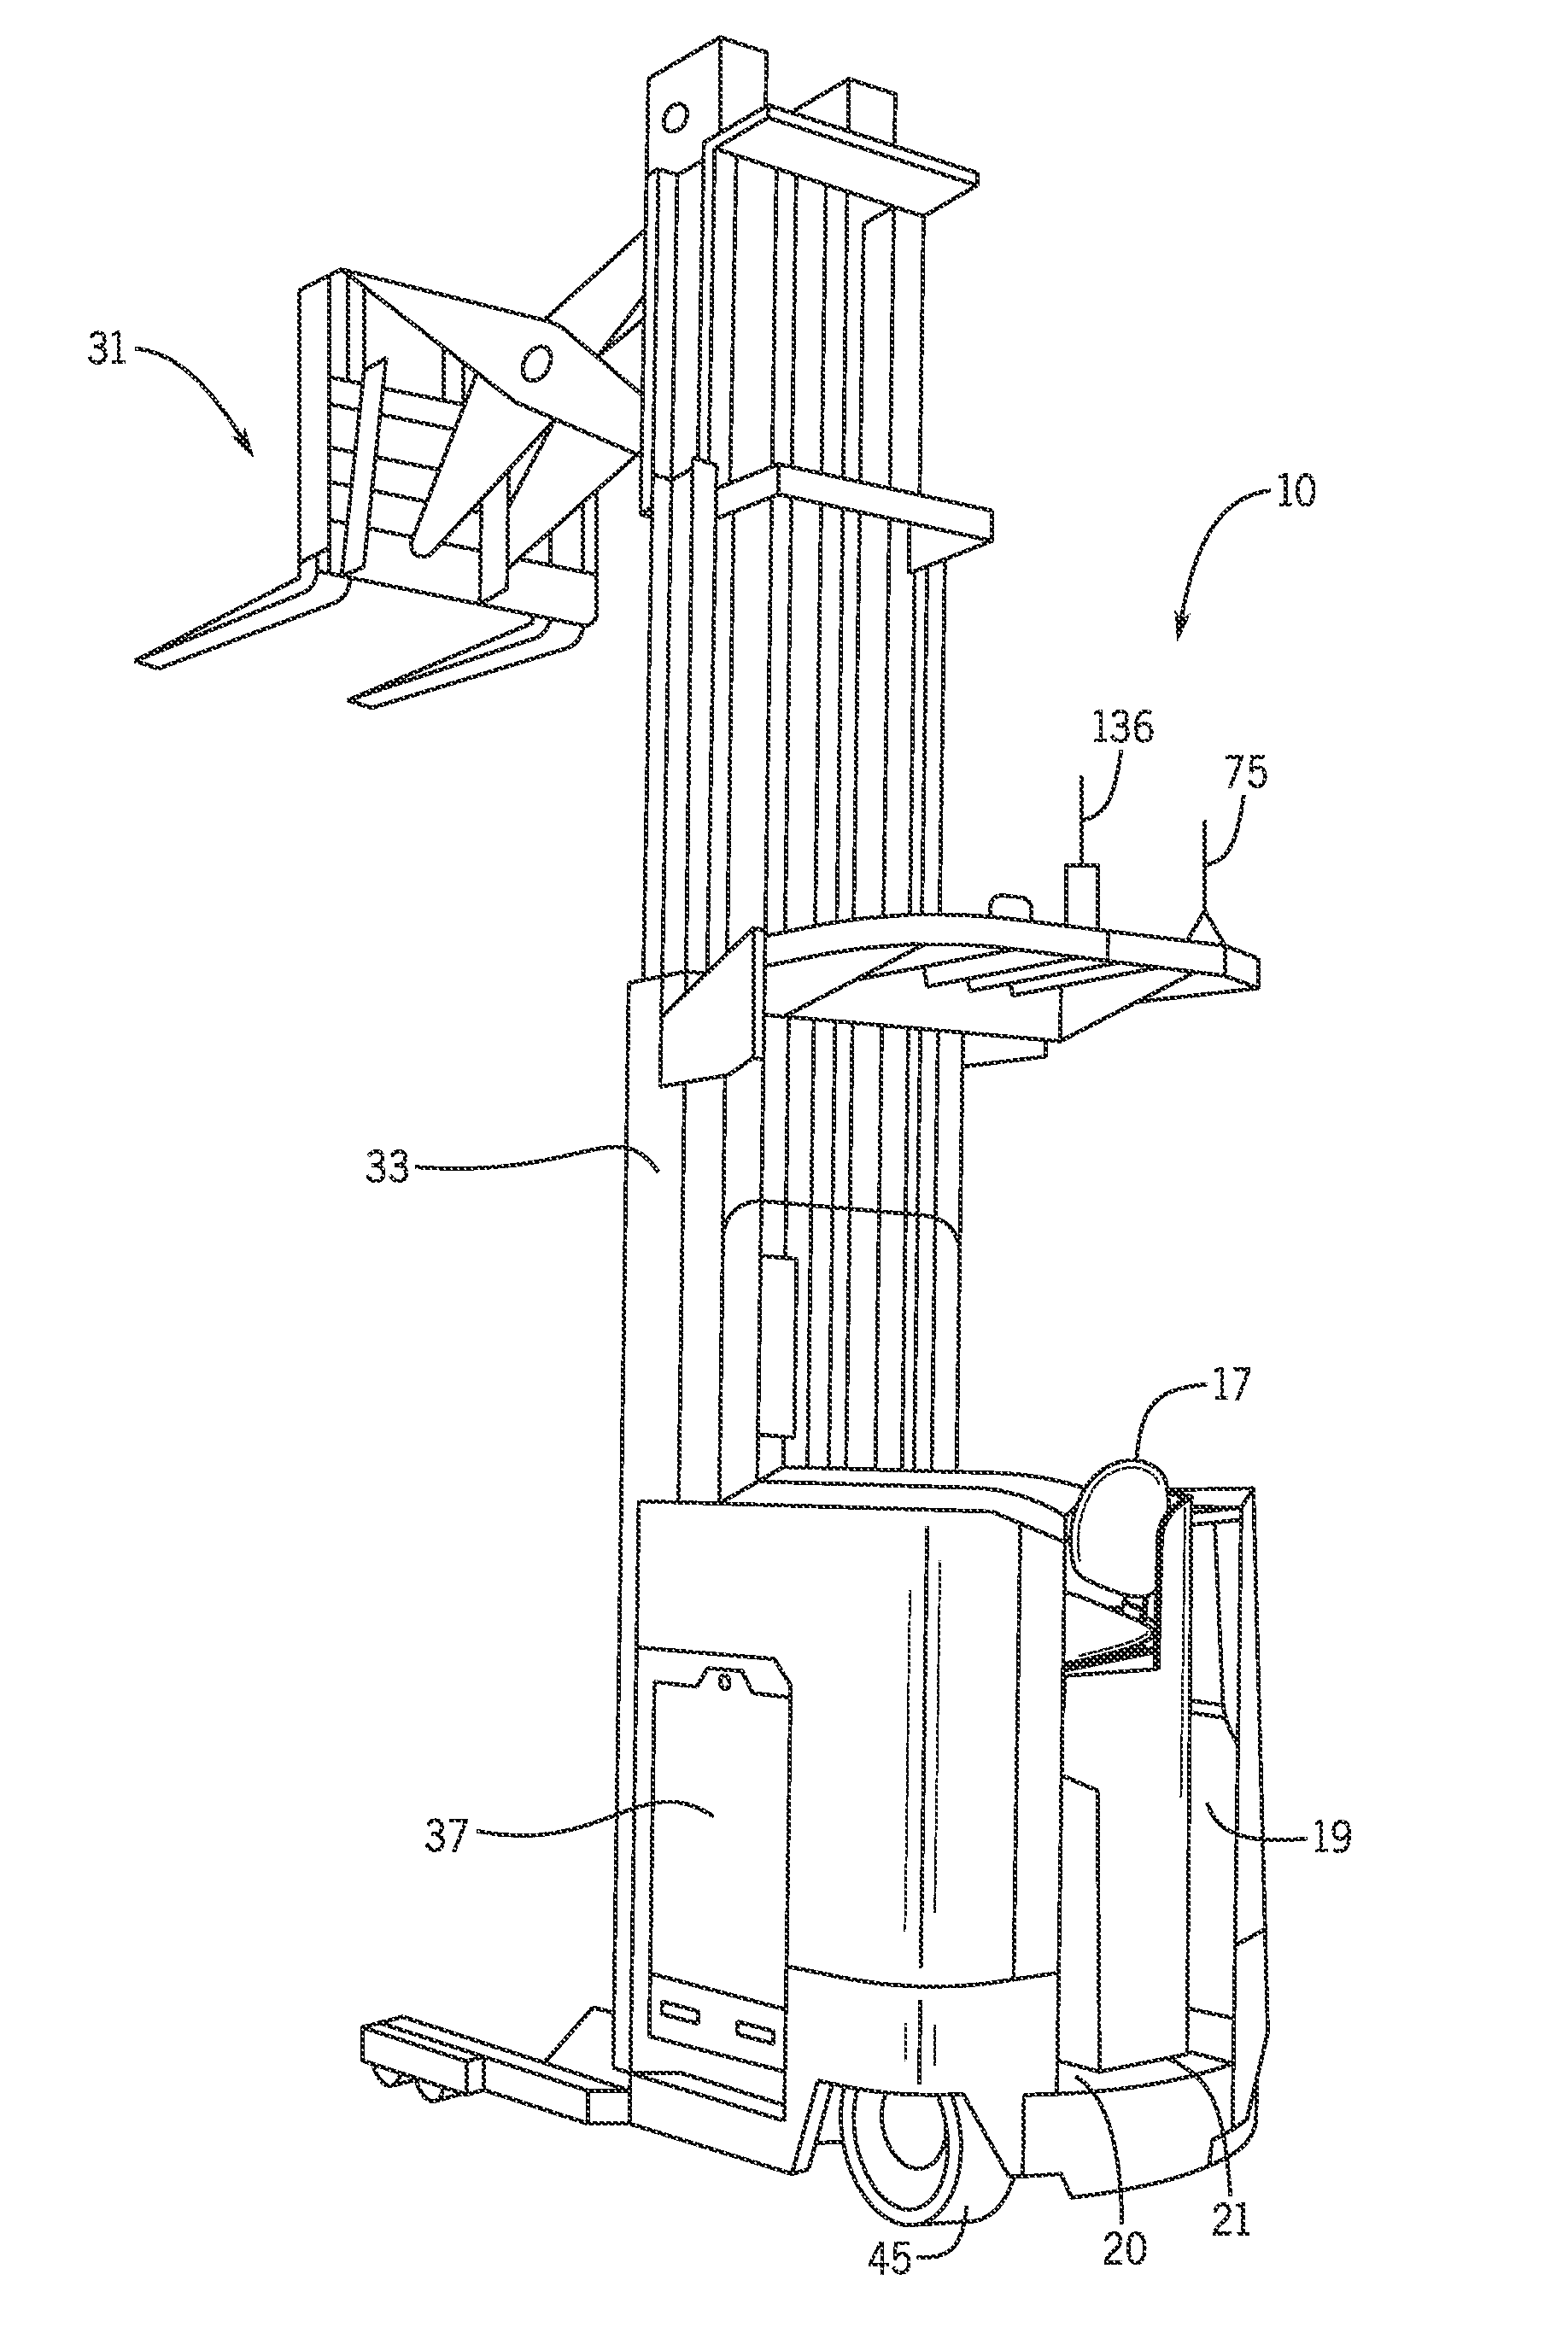 Integrated touch screen display with multi-mode functionality